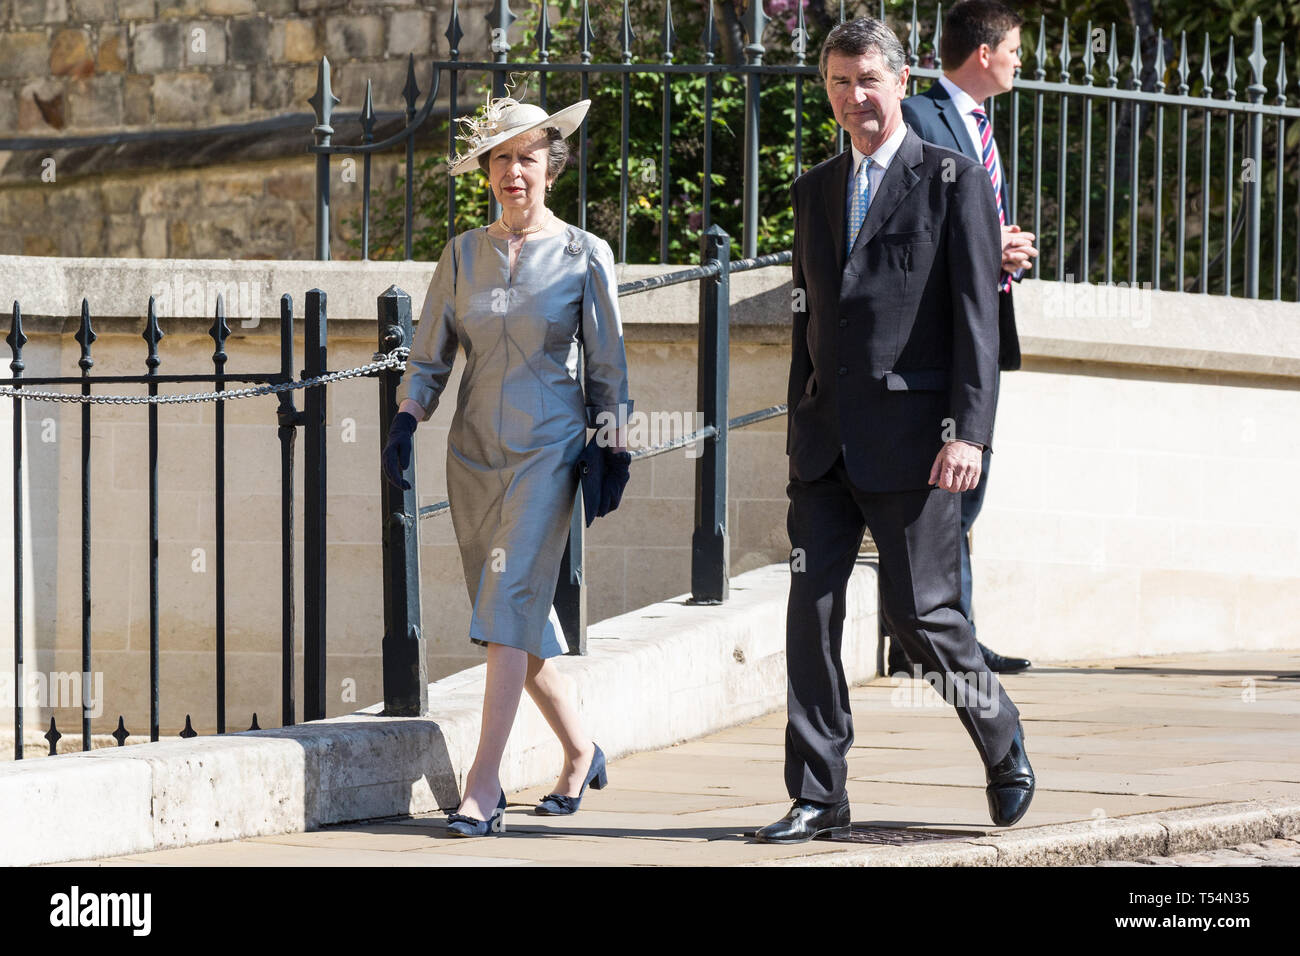 Windsor, UK. 21st April 2019. Princess Anne, Princess Royal, arrives with Vice Admiral Sir Timothy Laurence to attend the Easter Sunday Mattins service at St George's Chapel in Windsor Castle. Credit: Mark Kerrison/Alamy Live News Stock Photo